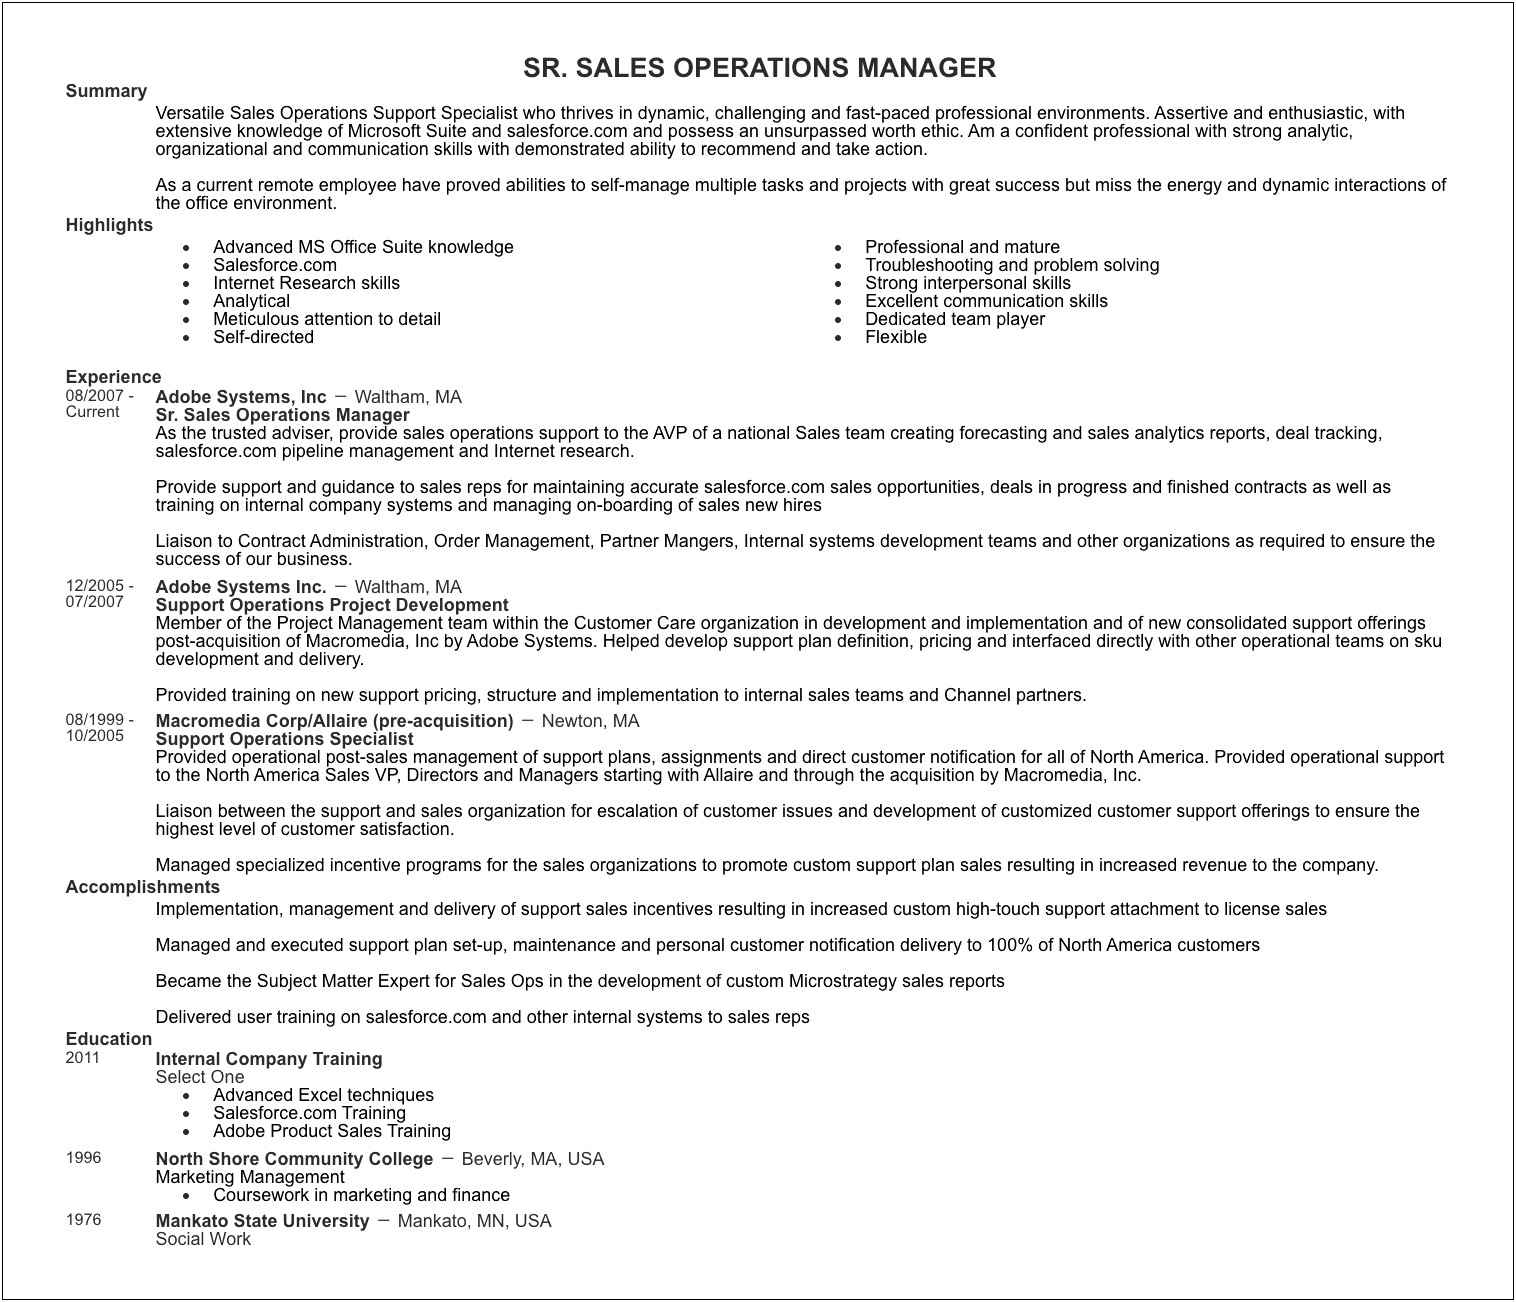 Recruiters Look For In Managers Resume